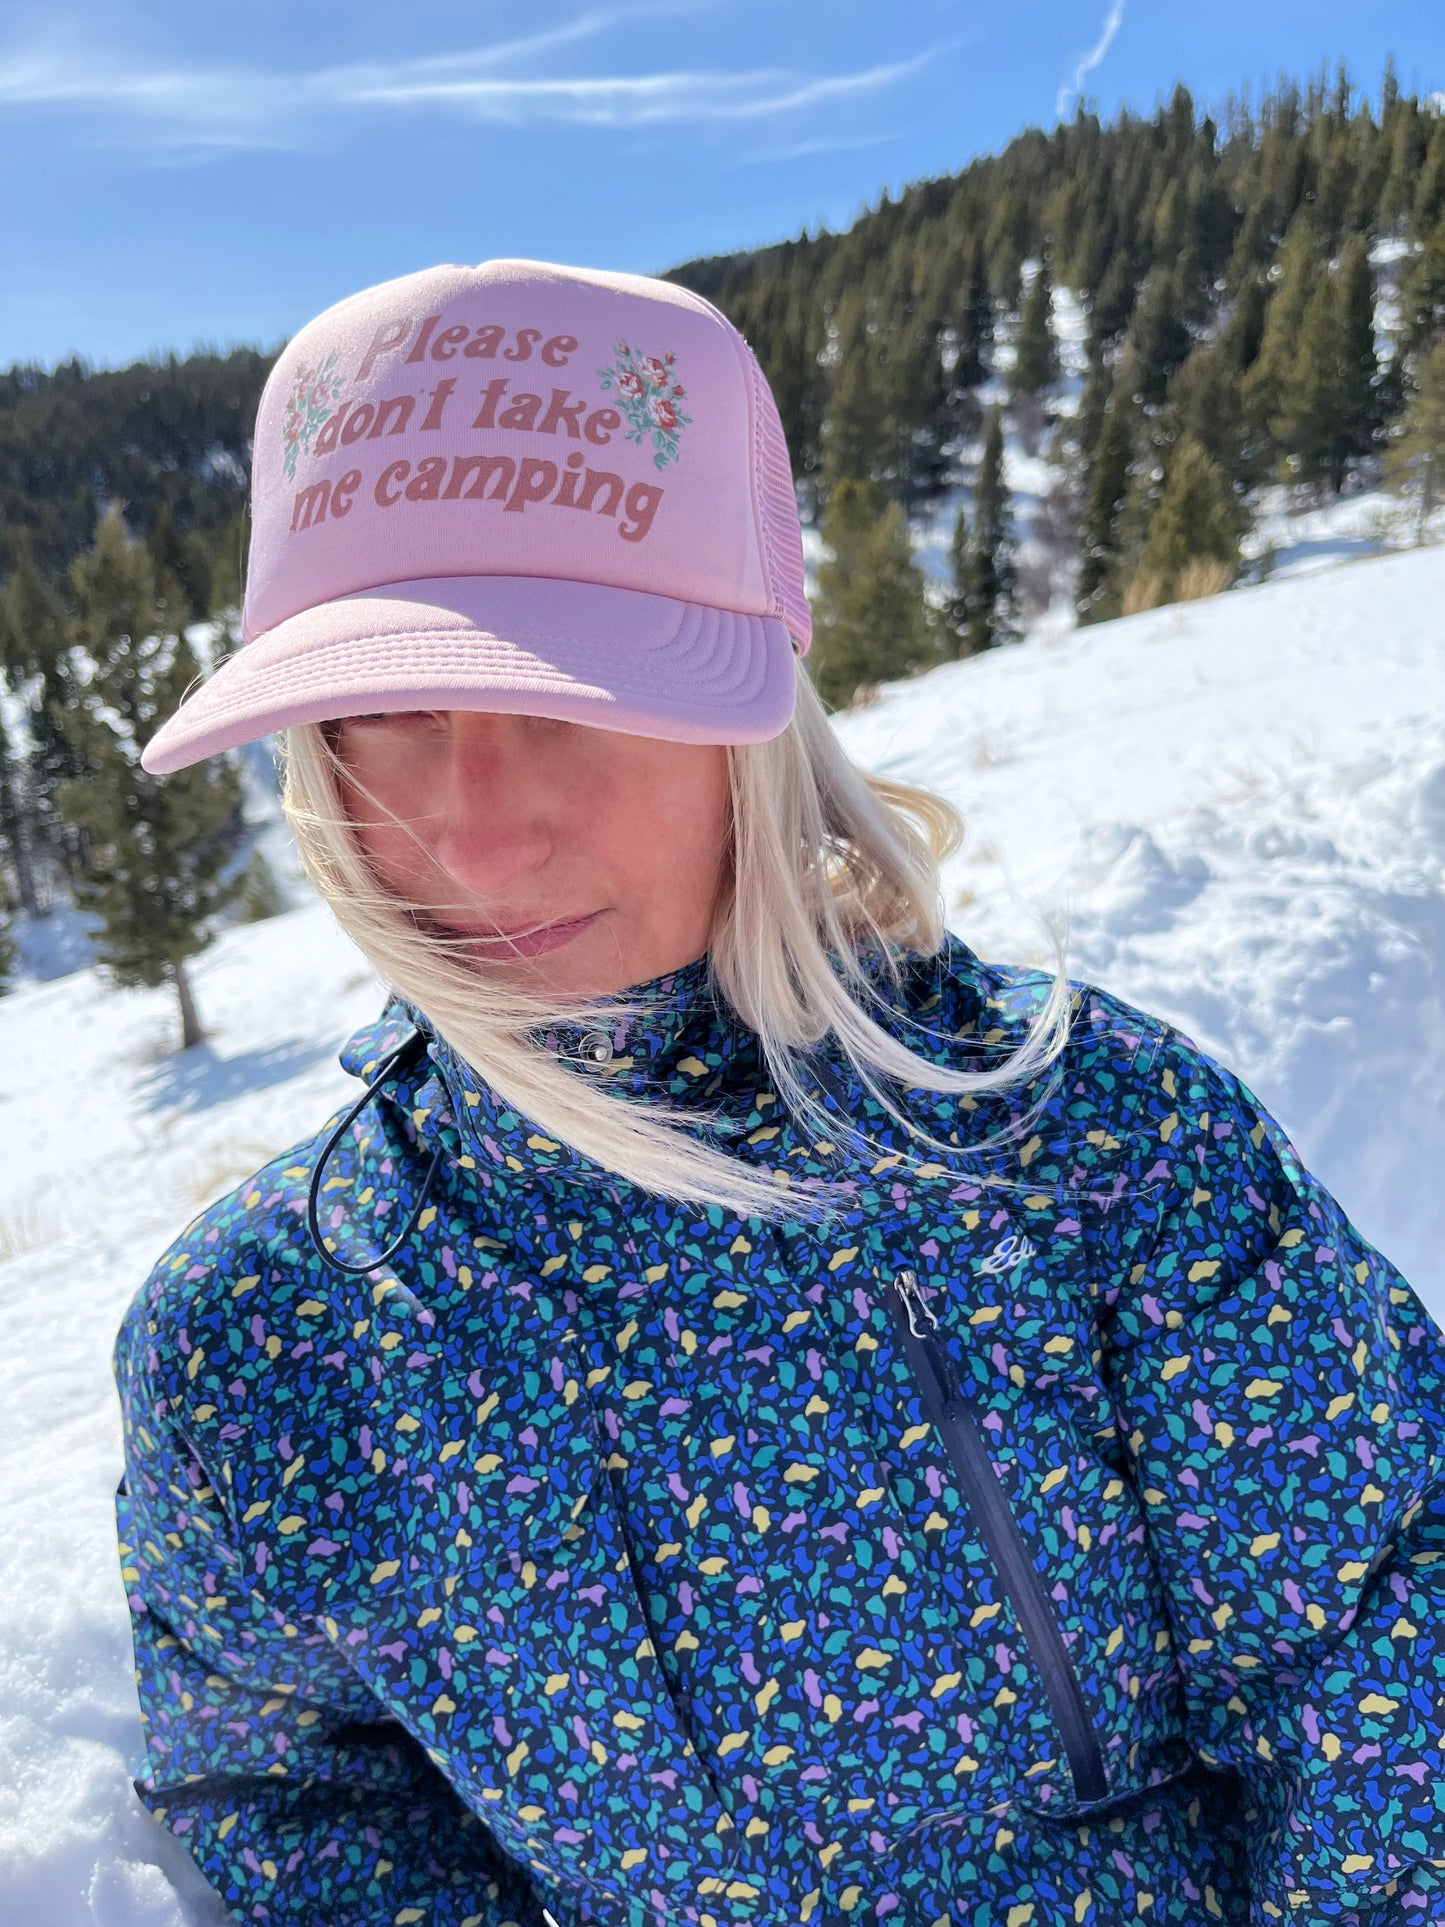 dont take me camping funny trucker hat pink with flowers cute camp mesh back hat retro style fun fashion baseball hat womens coin laundry bozeman montana 